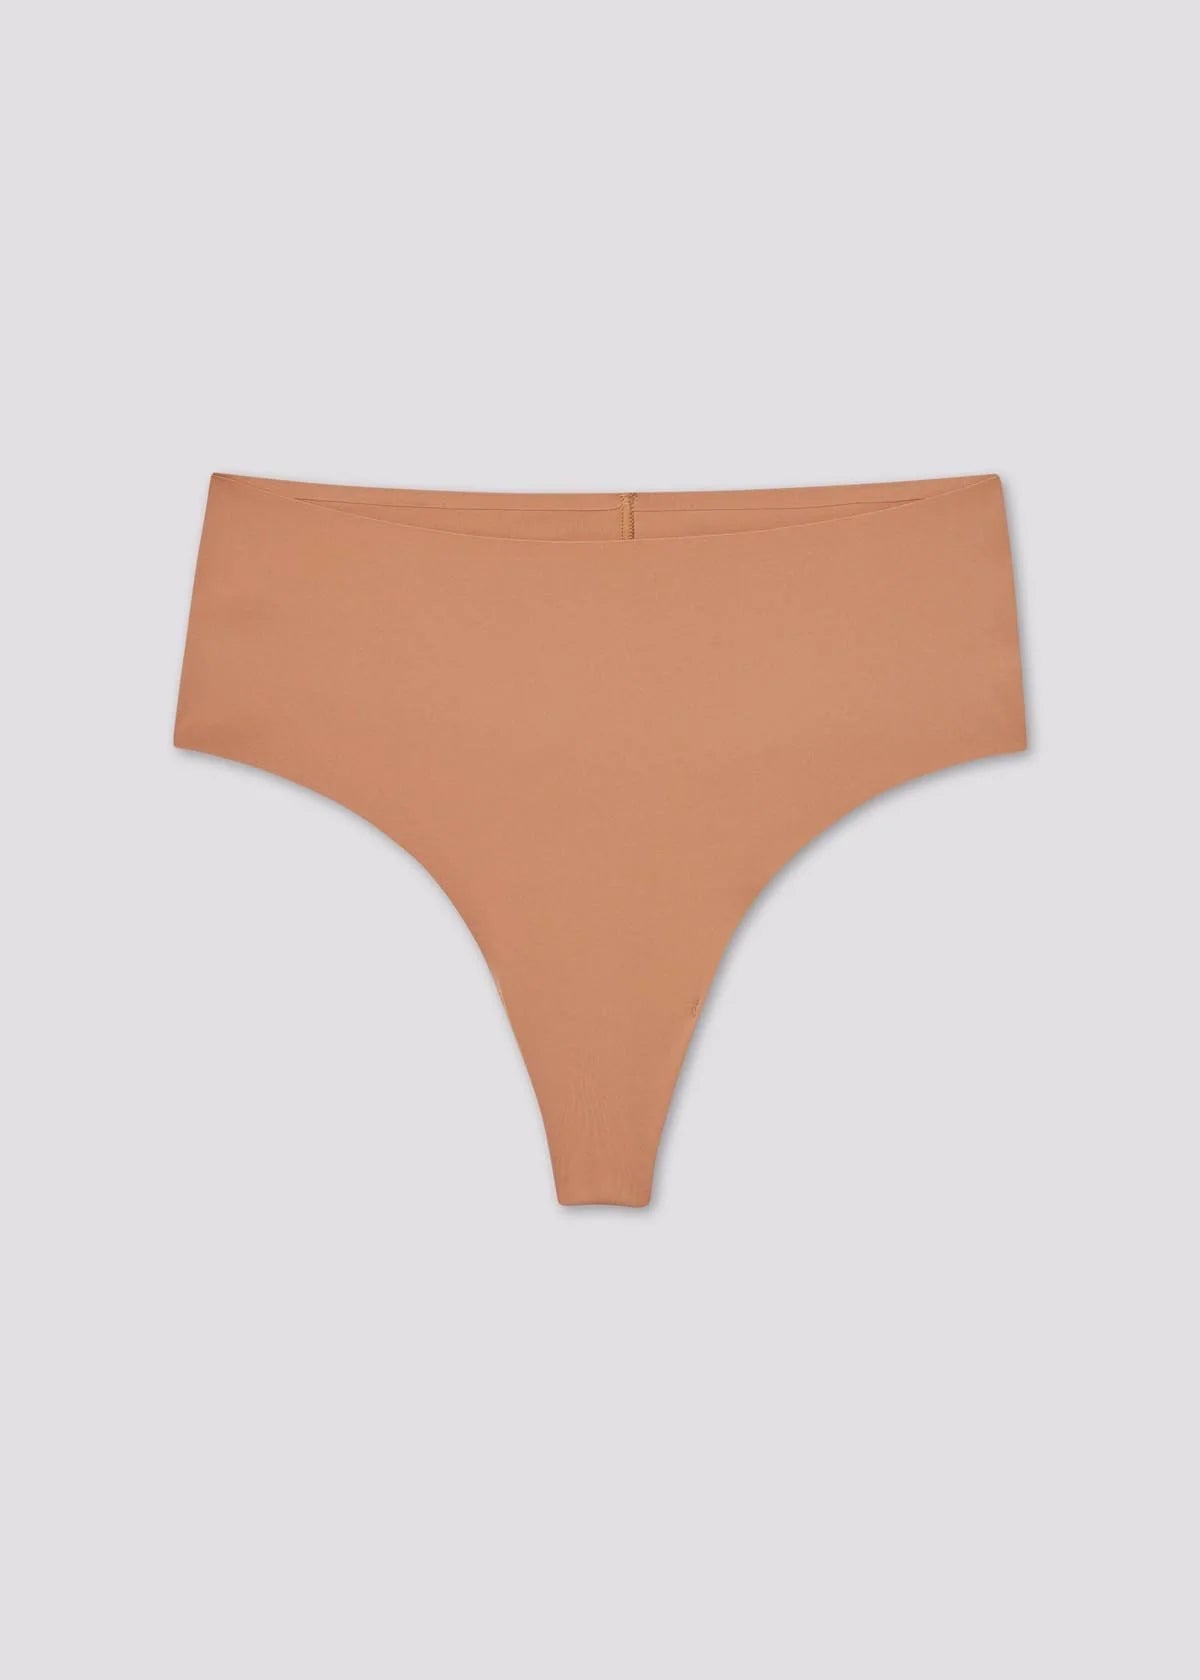 Girlfriend Collective High-Rise Thong in Toast